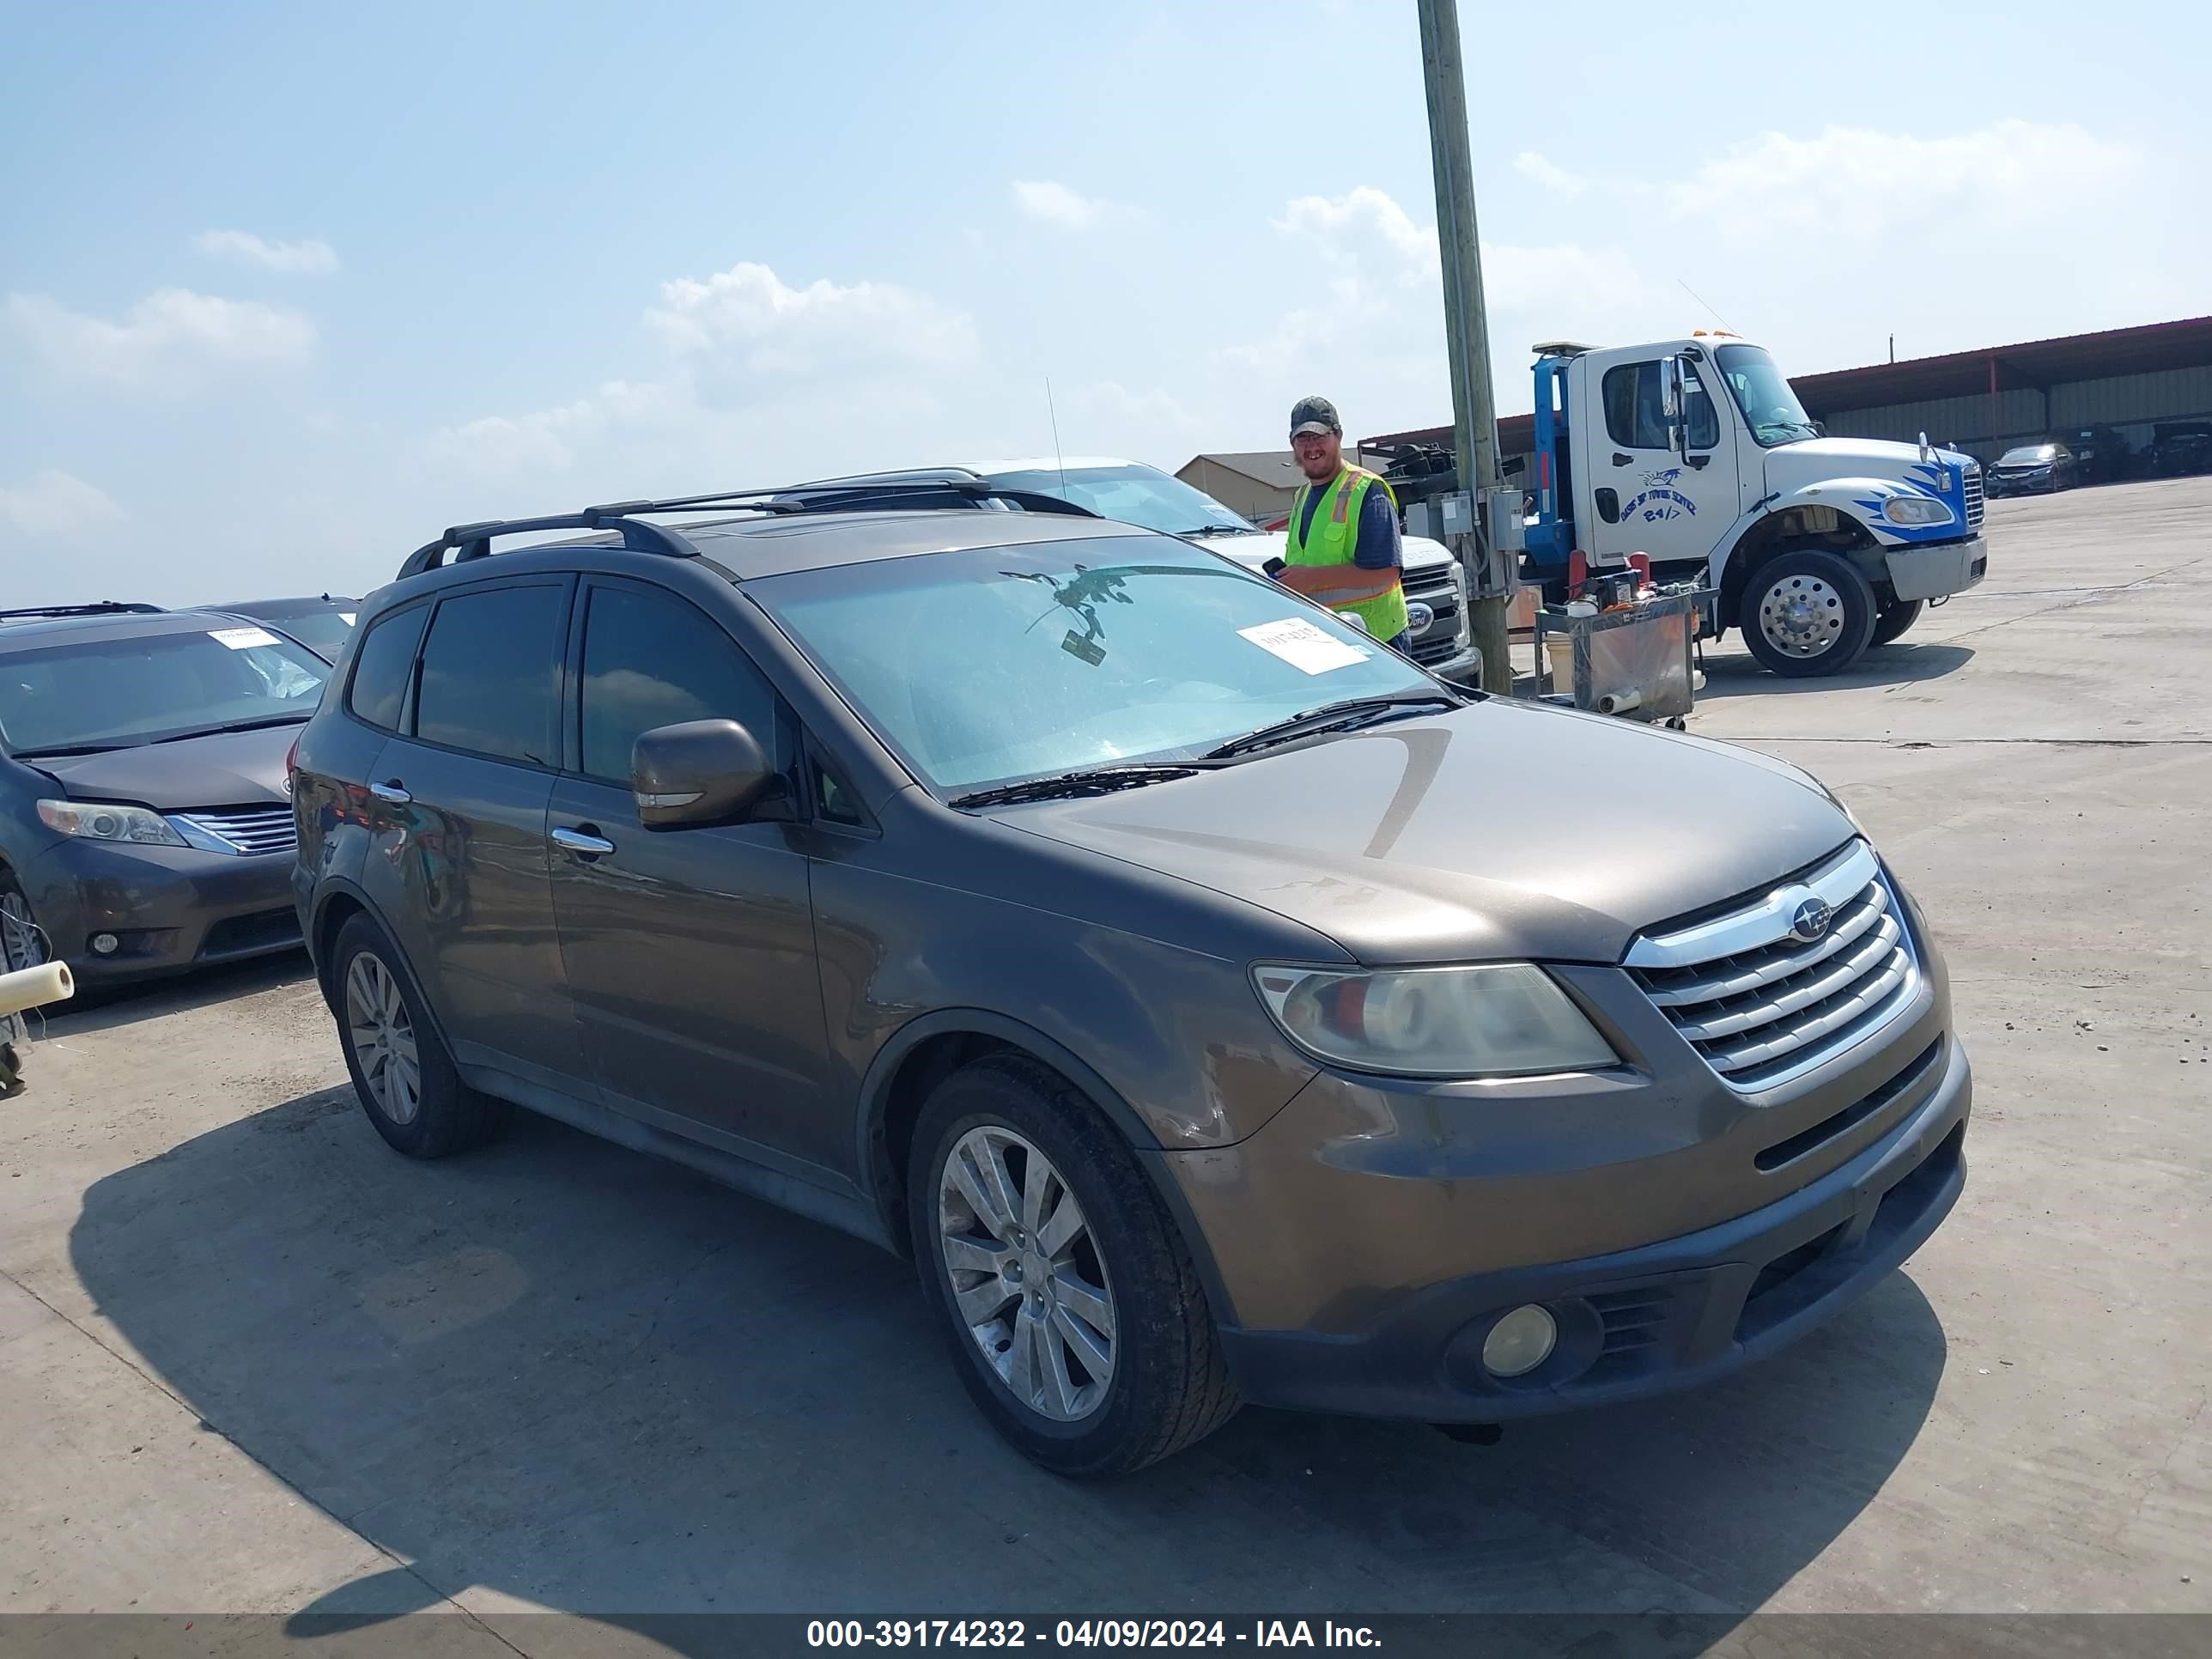 vin: 4S4WX97D394402180 4S4WX97D394402180 2009 subaru tribeca 3600 for Sale in 78616, 2191 Highway 21 West, Dale, Texas, USA